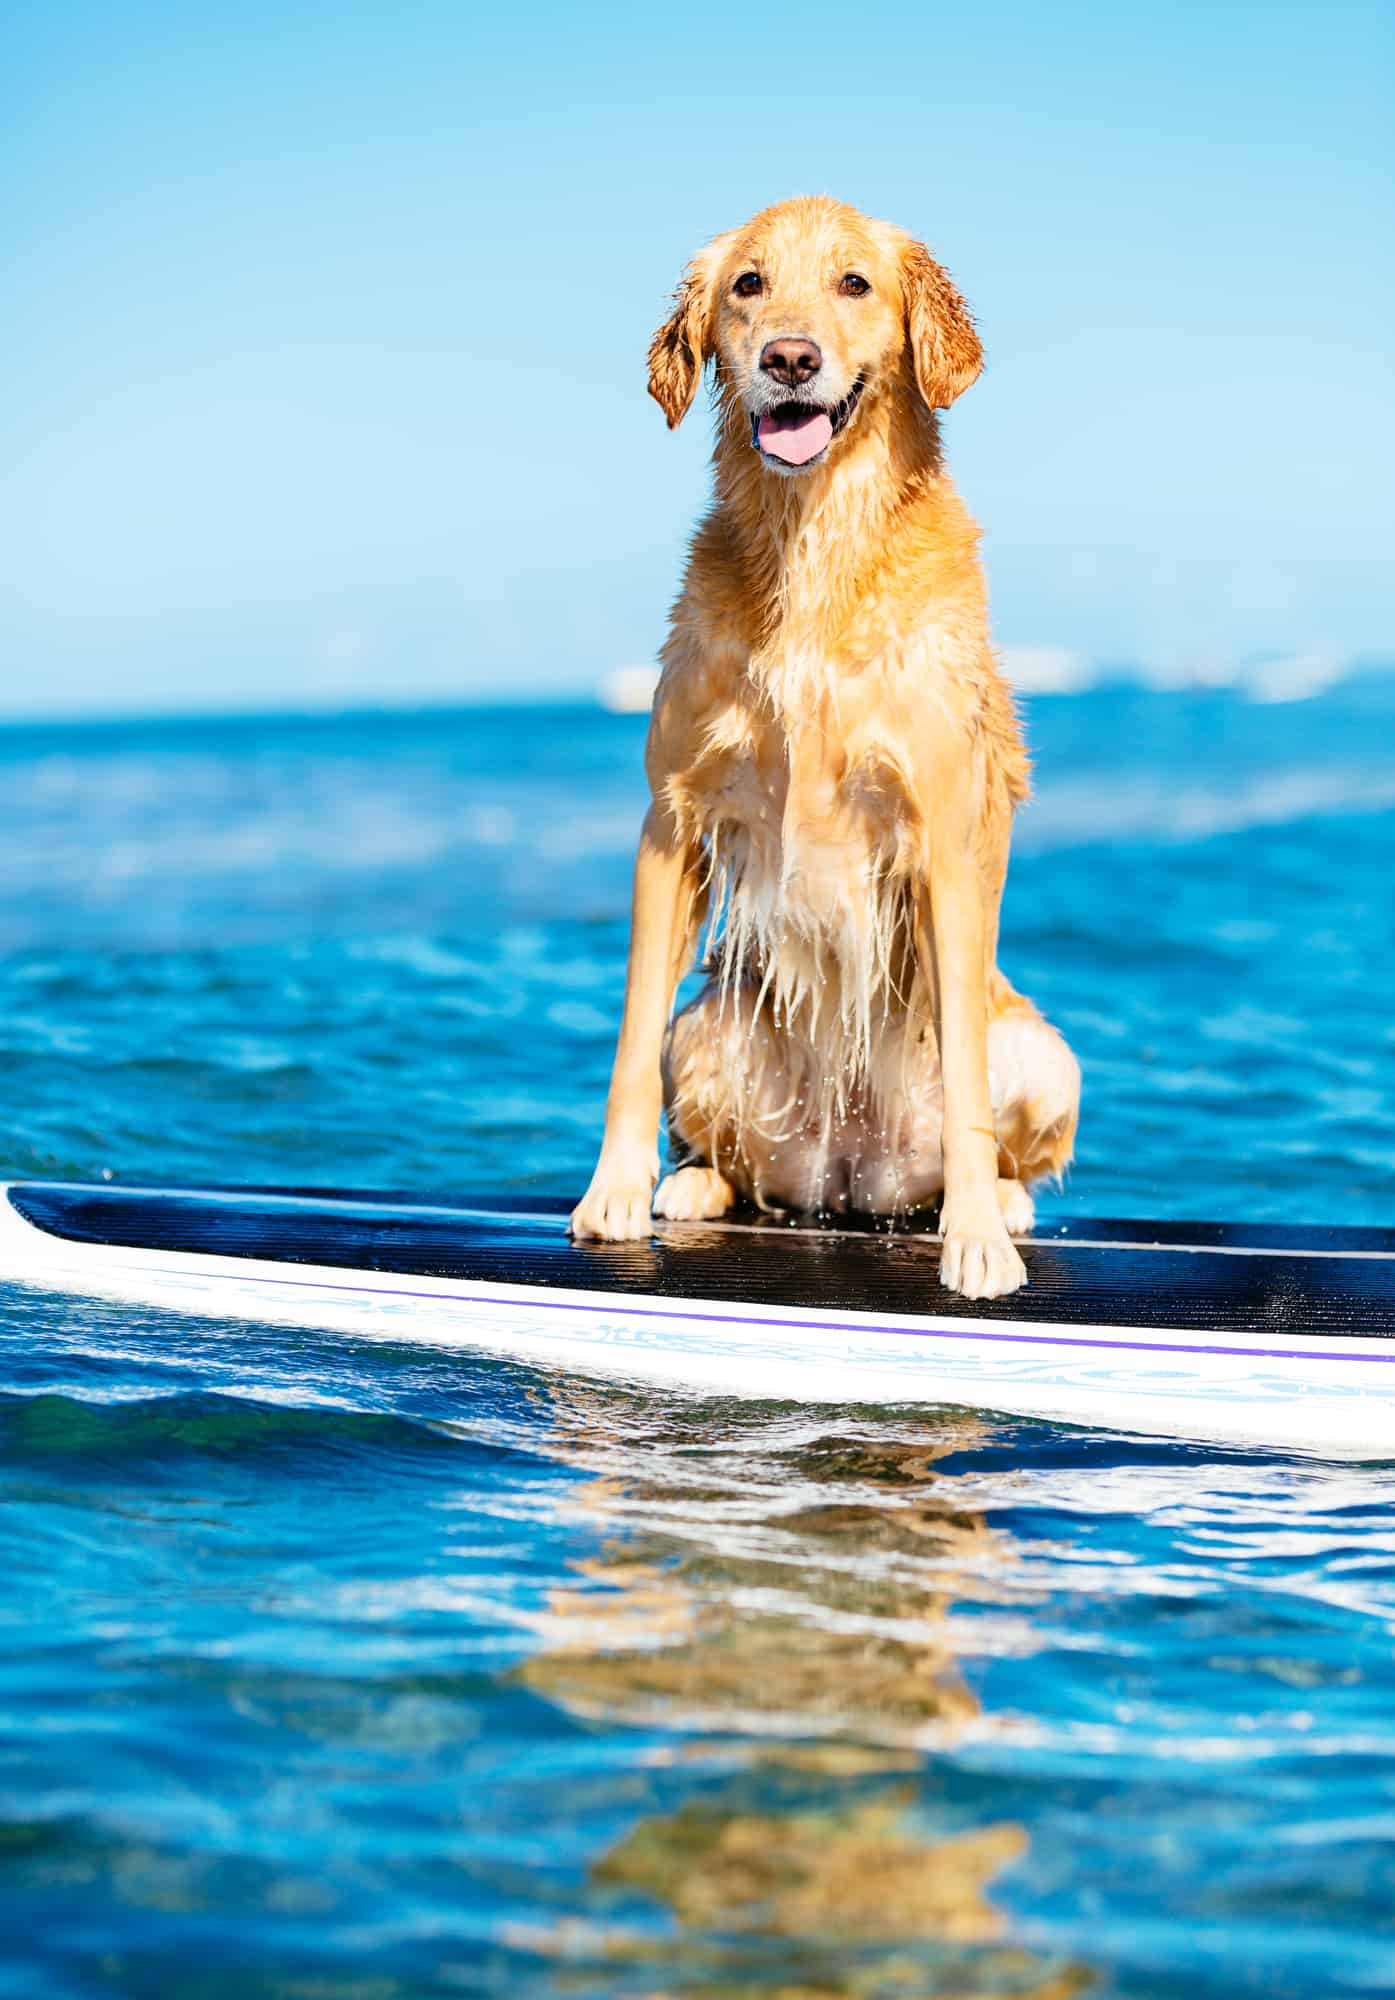 Surfing Dog, Happy Young Golden Retriever on Surf Board